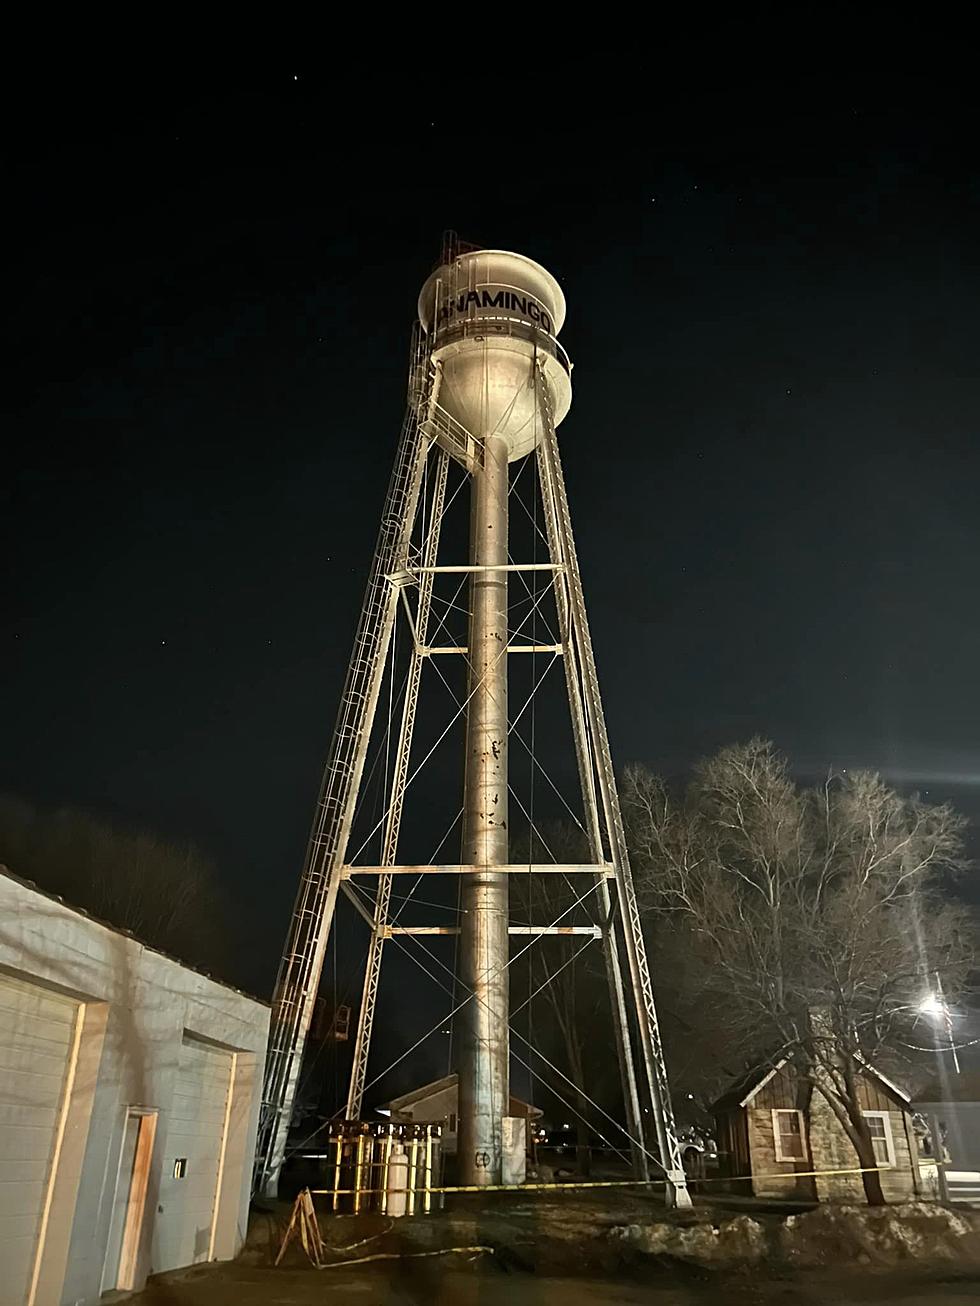 A Shout Out To All Those Small Town Water Towers